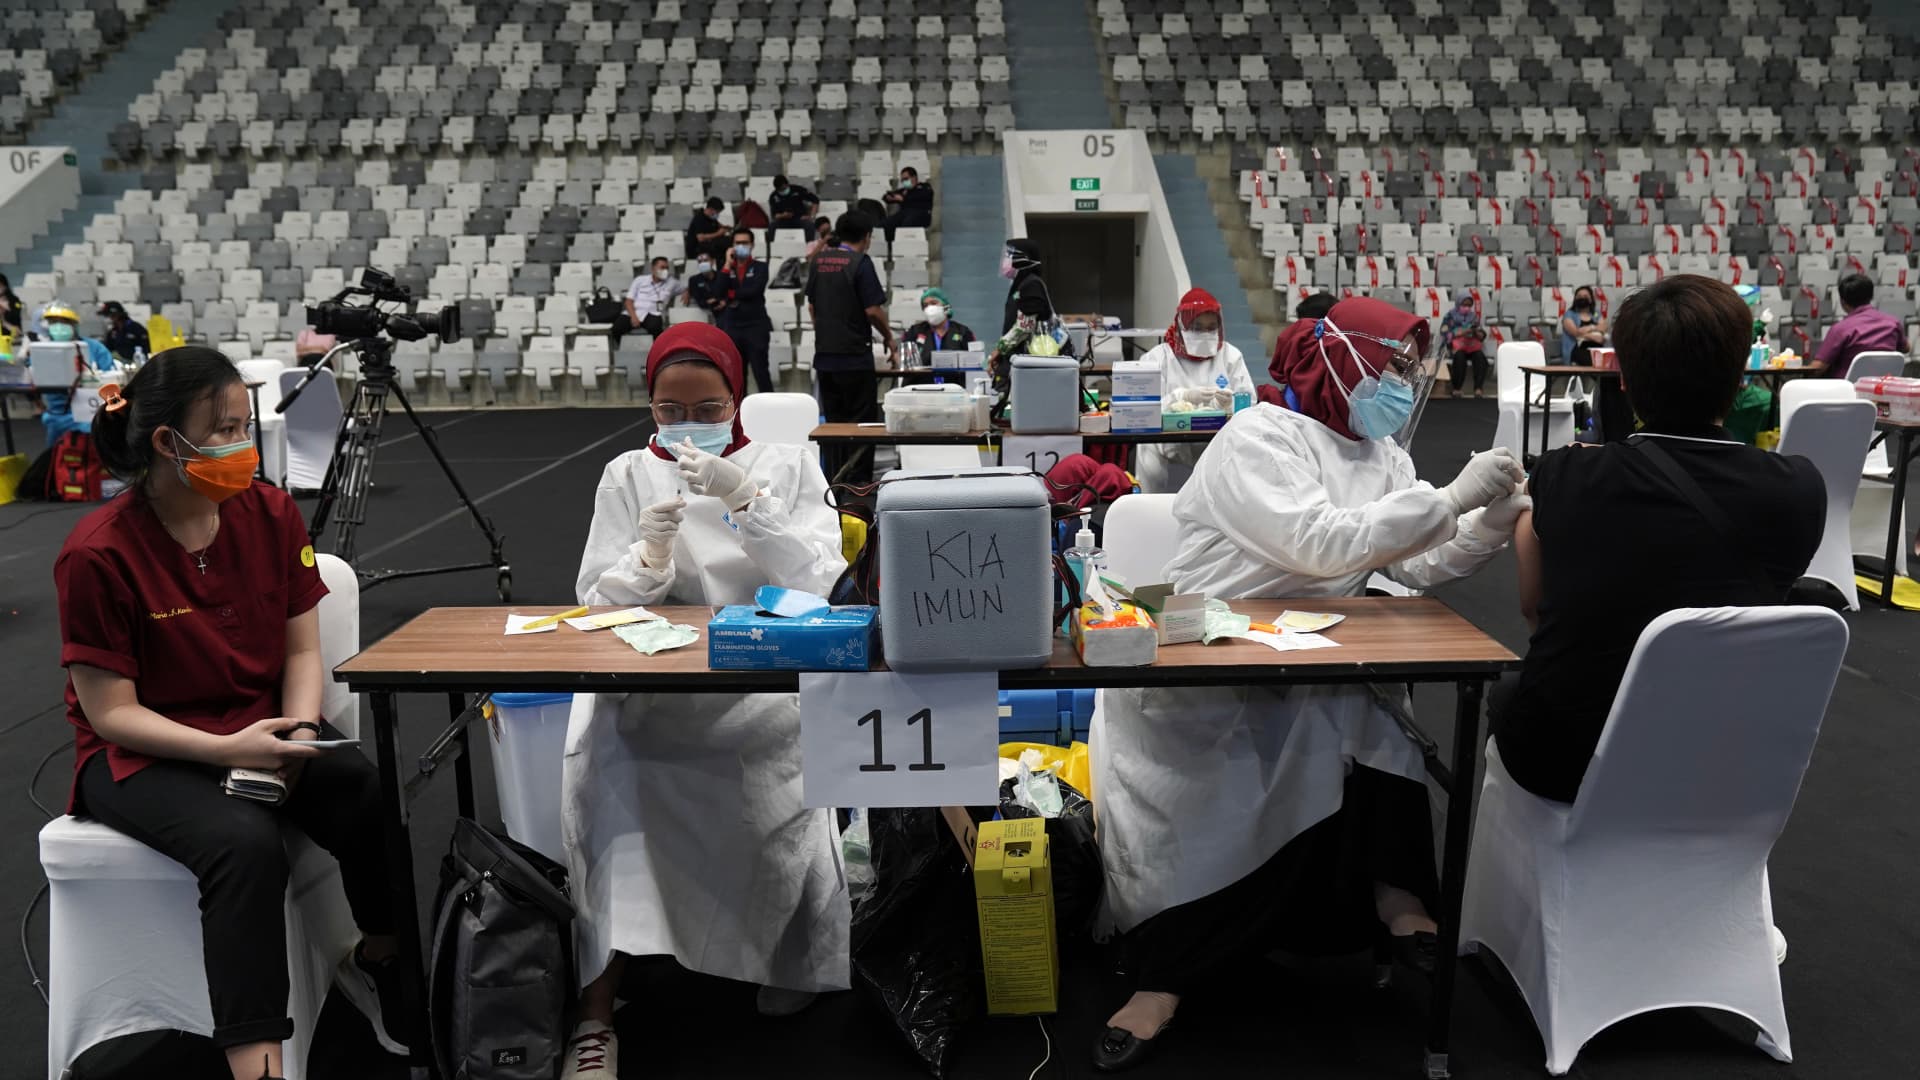 Healthcare workers receive a dose of the Sinovac Biotech Ltd. Covid-19 vaccine at the Istora Senayan Sports Complex in Jakarta, Indonesia, on Thursday, Feb. 4, 2021.